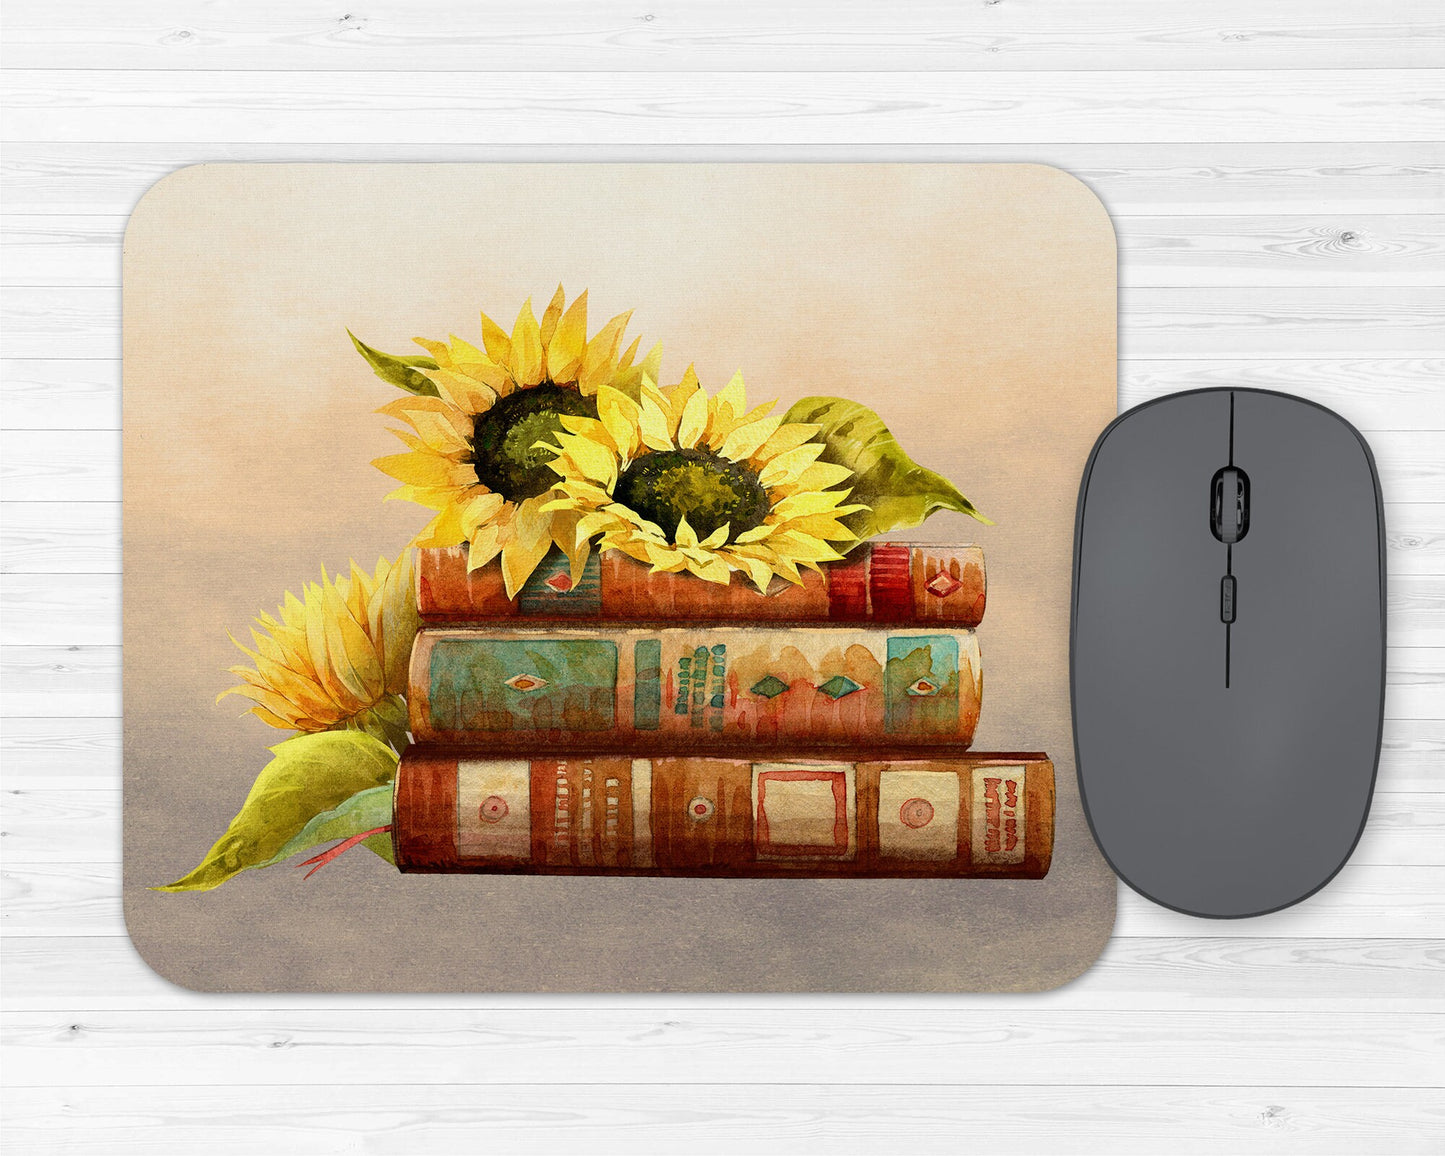 Sunflower and Books Art Rubber Mousepad